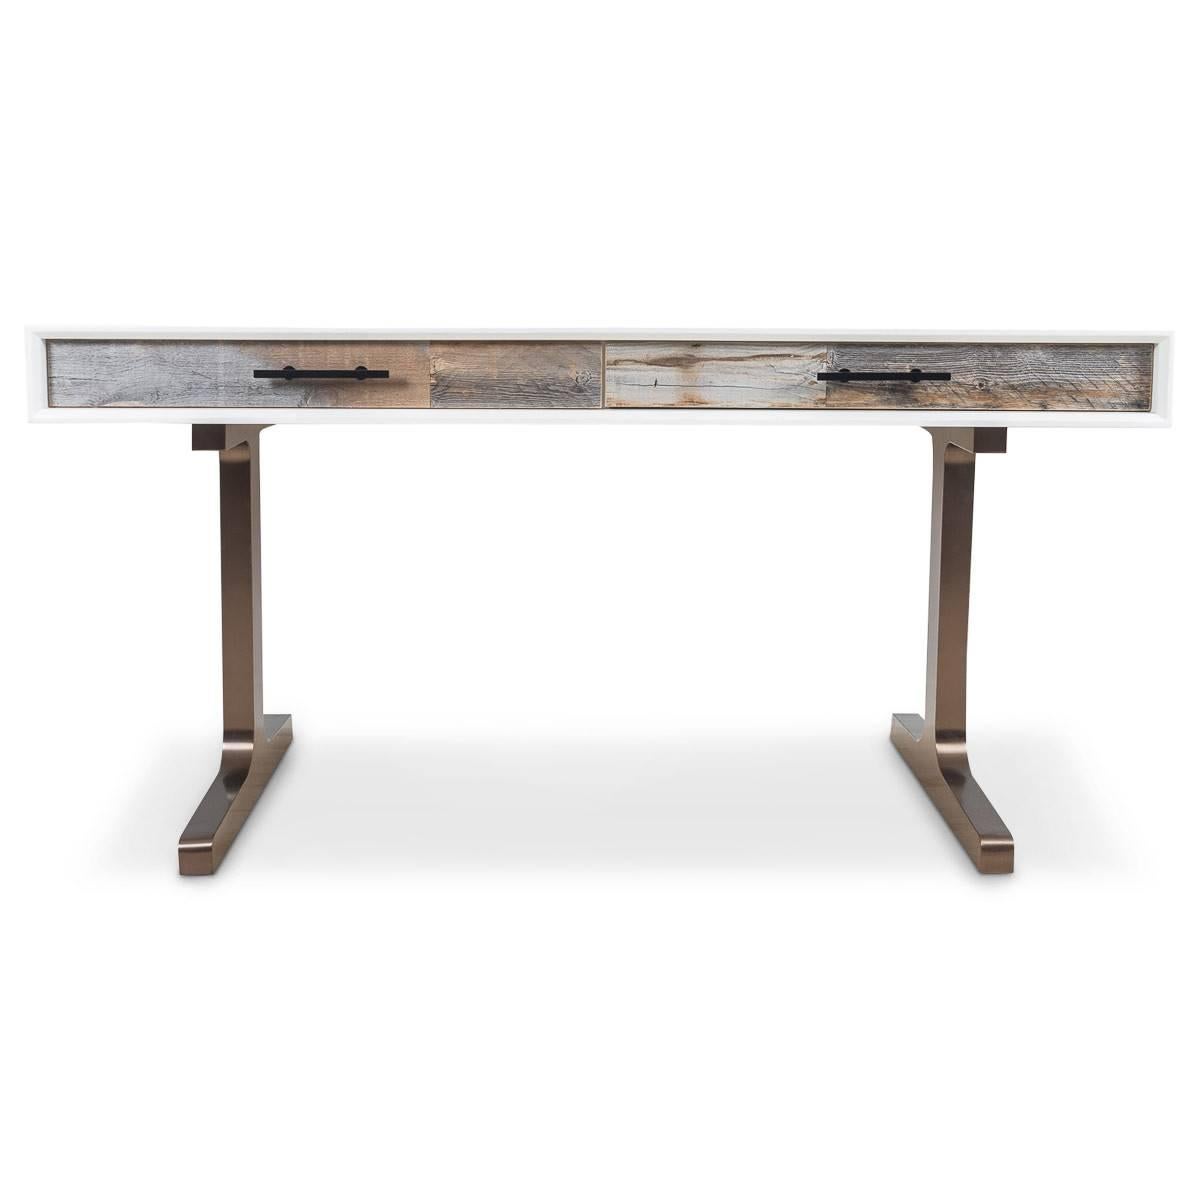 Our stylish new desk is an Industrial modernist's dream. A matte white box with beautiful grey recycled wood drawers and matte black metal bar pulls creates the perfect mix of style and rugged functionality. This desk sits on a solid T-shaped